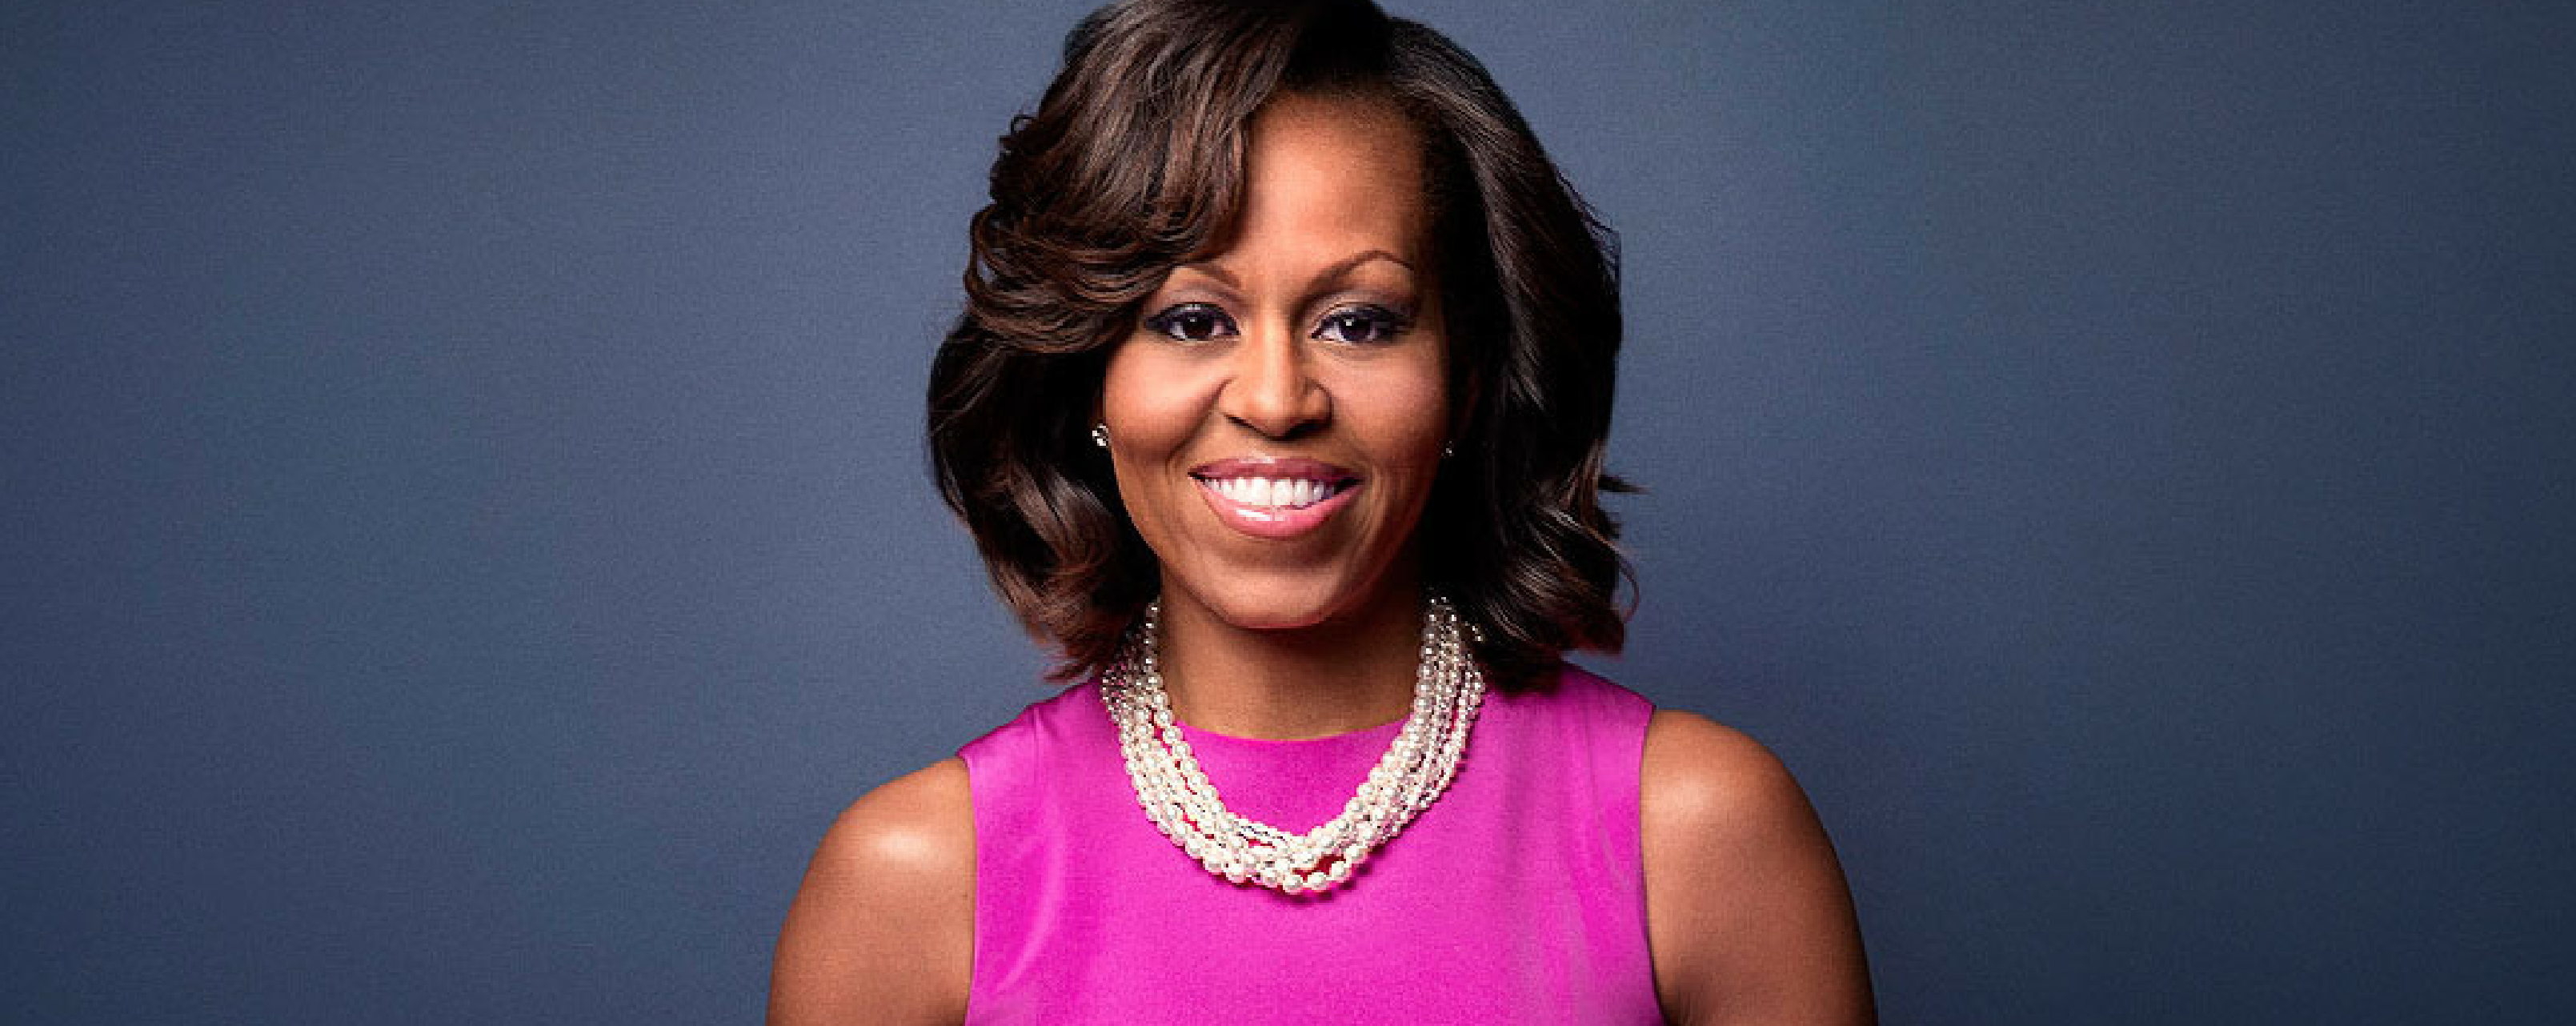 World's most powerful woman Michelle Obama